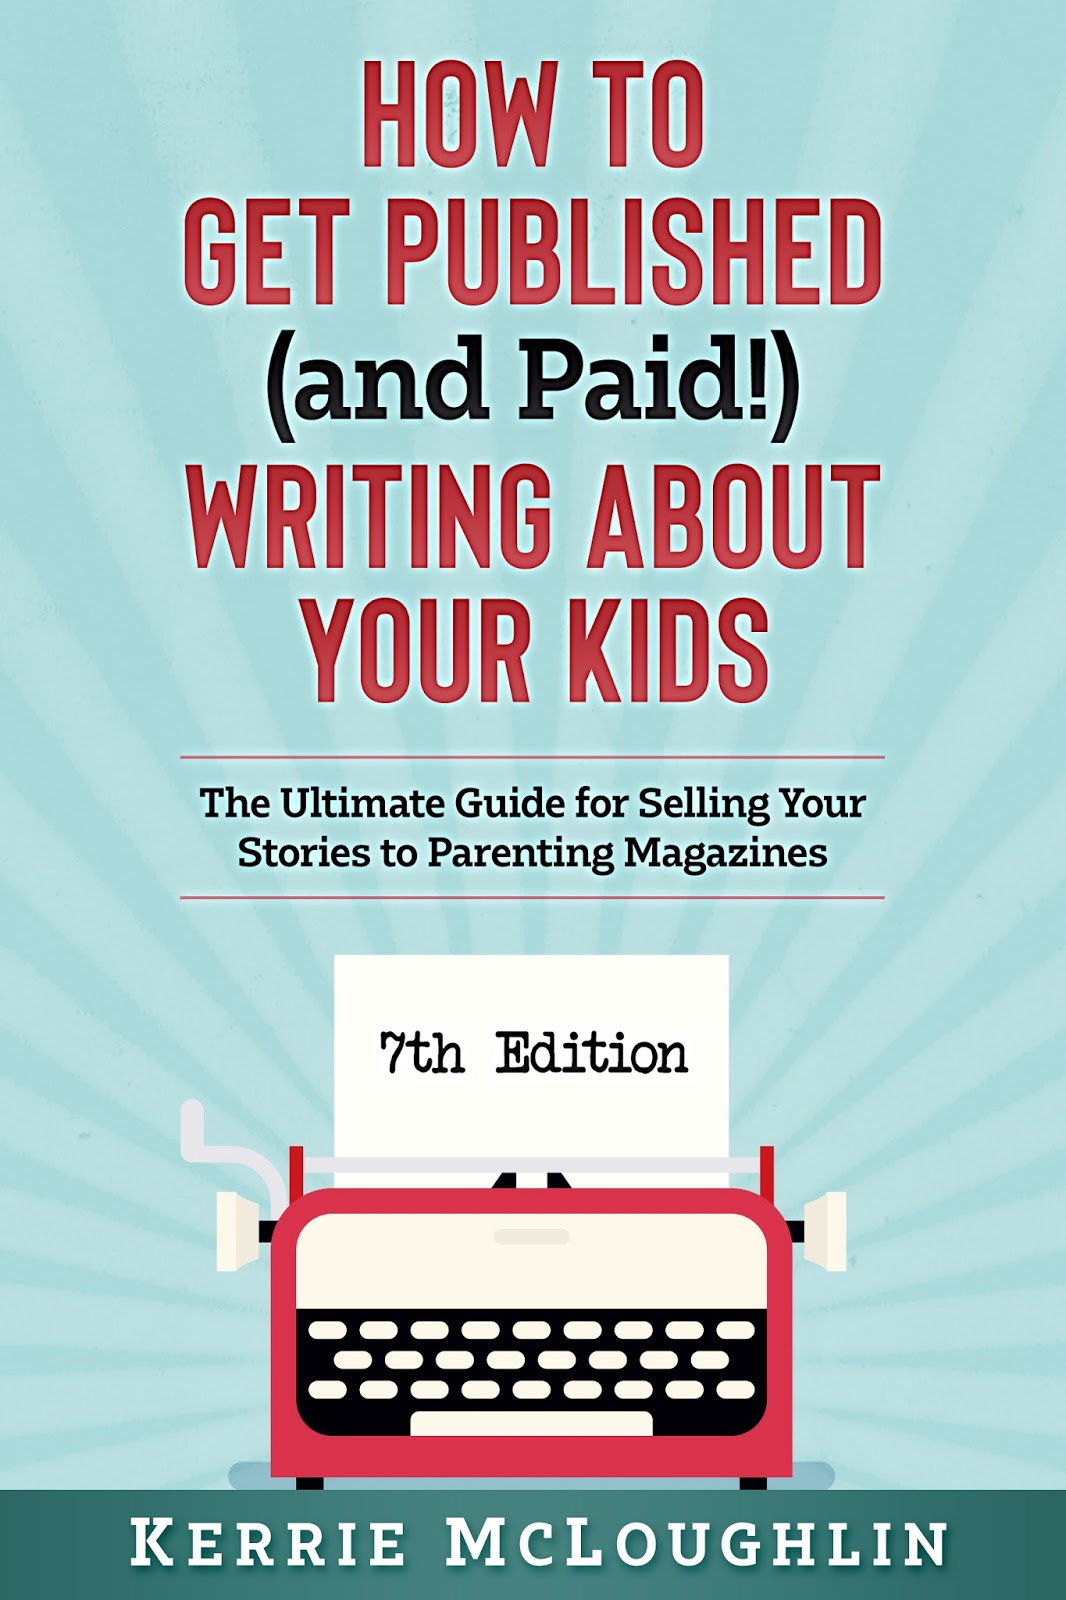 The Kerrie Show: How to Get Published (and Paid!) Writing About